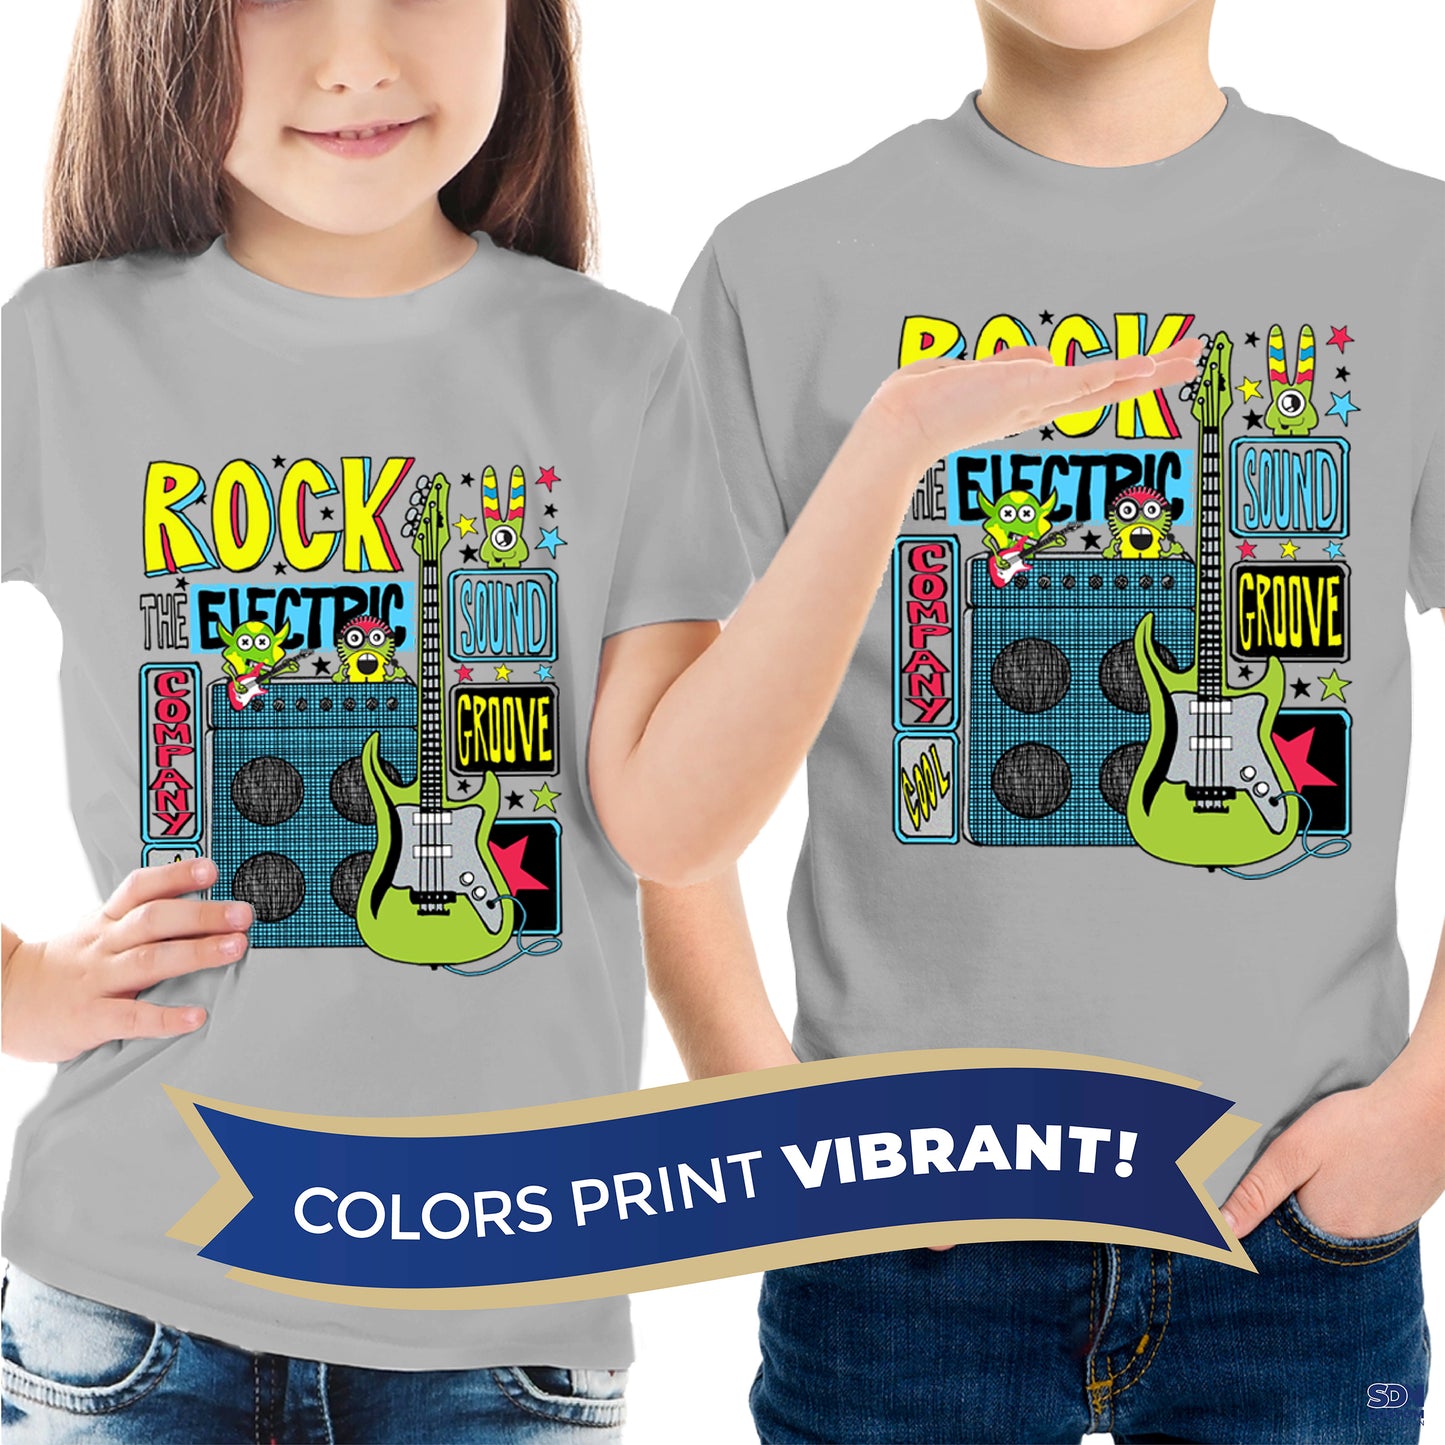 printed t shirts for kids